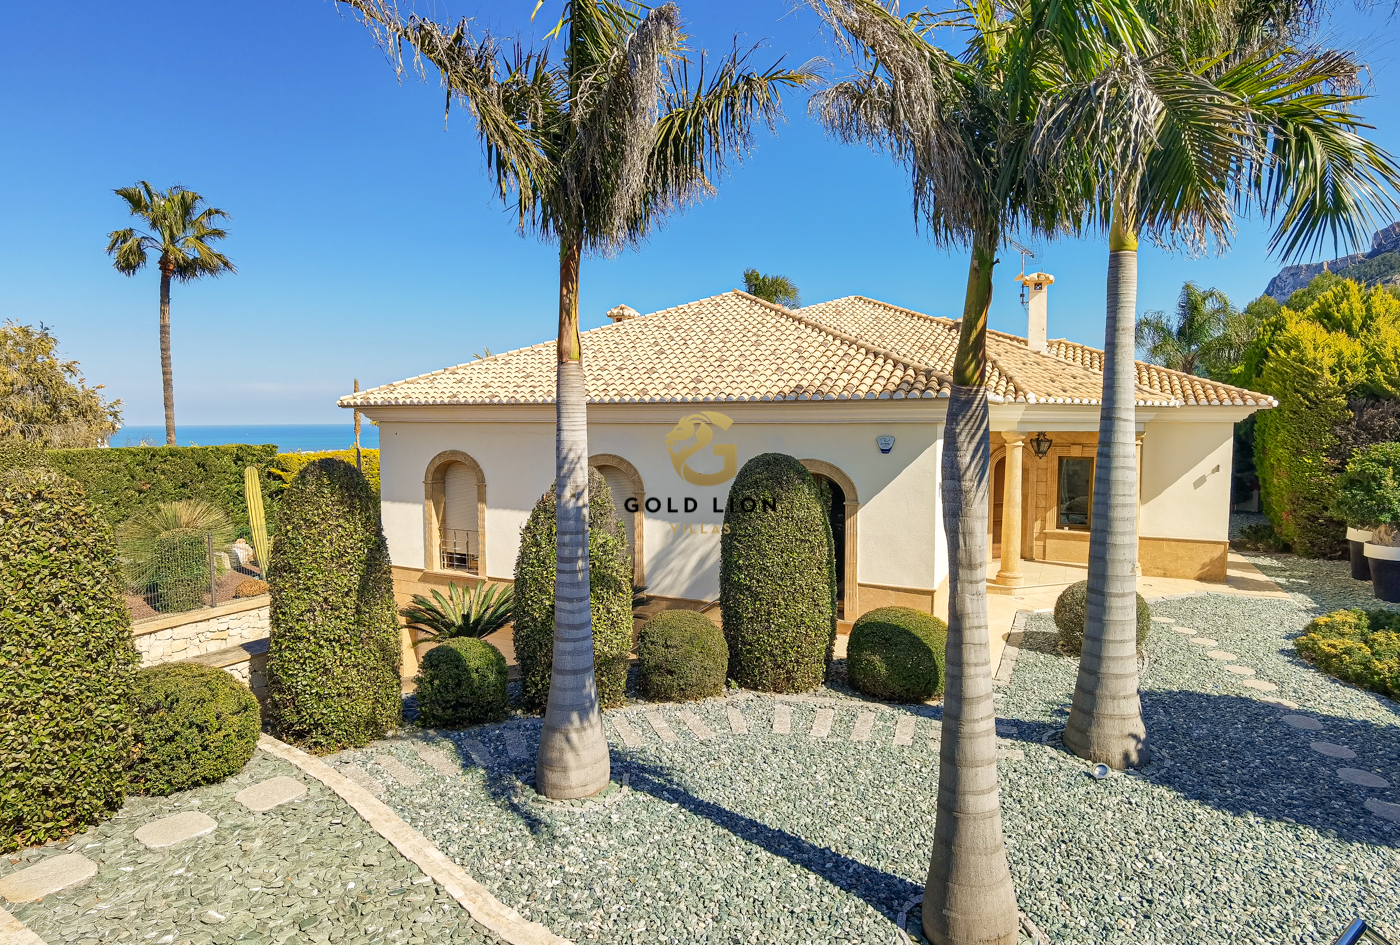 Luxury villa with incredible views of the sea and Denia castle